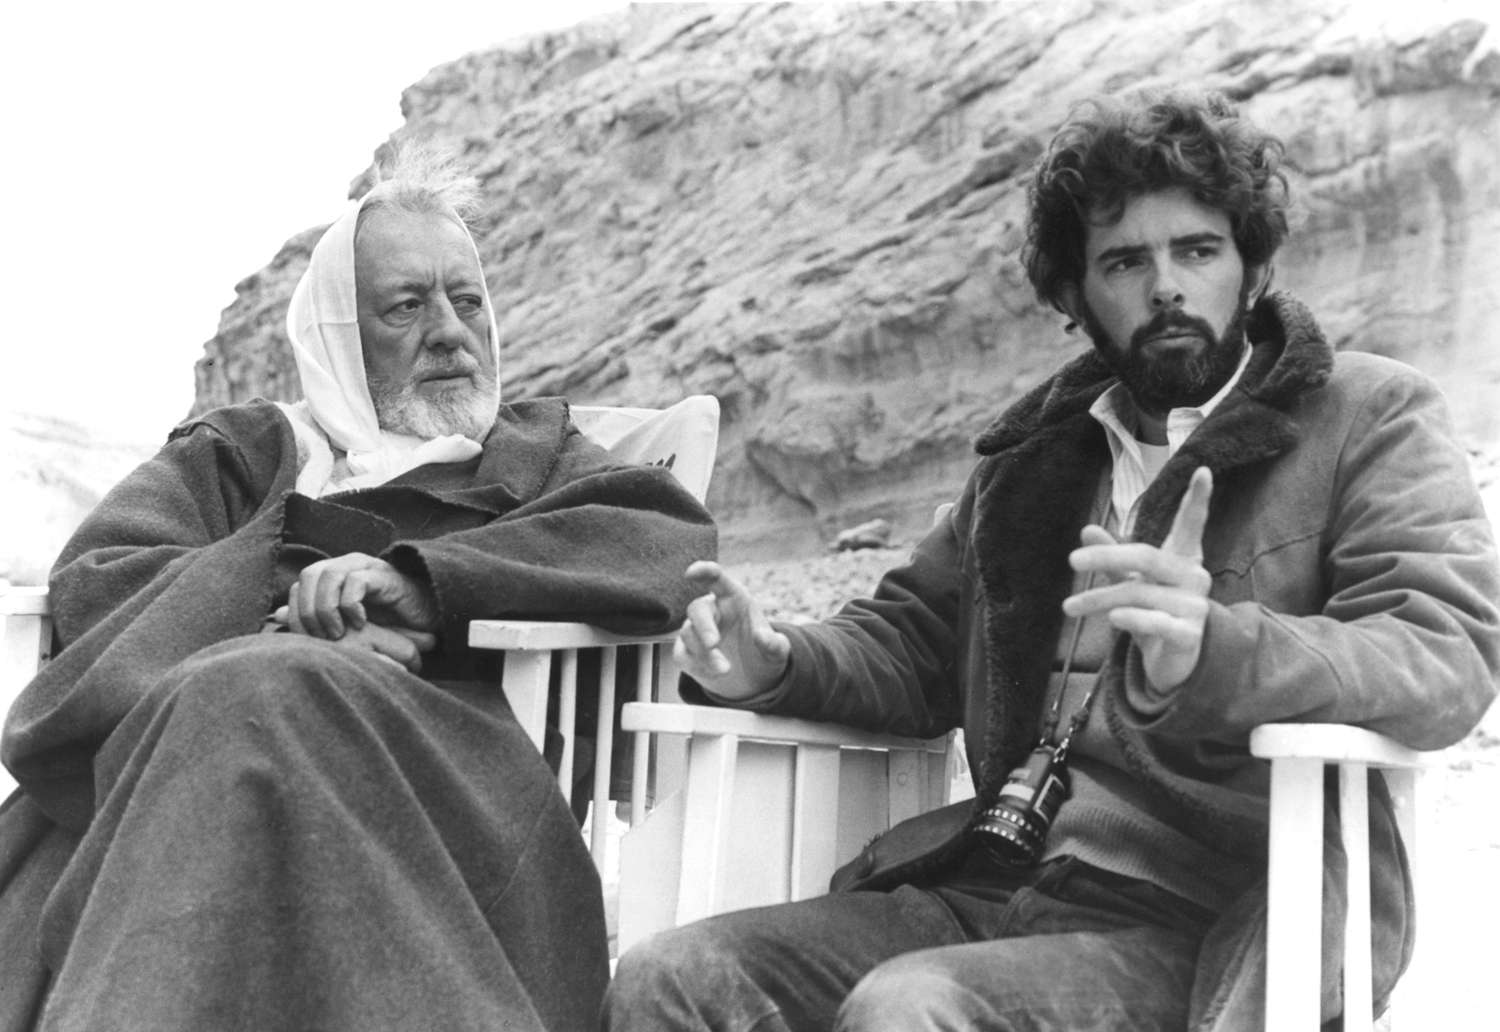 British actor Alec Guinness with American director, screenwriter and producer George Lucas on the set of his movie Star Wars: Episode IV - A New Hope.